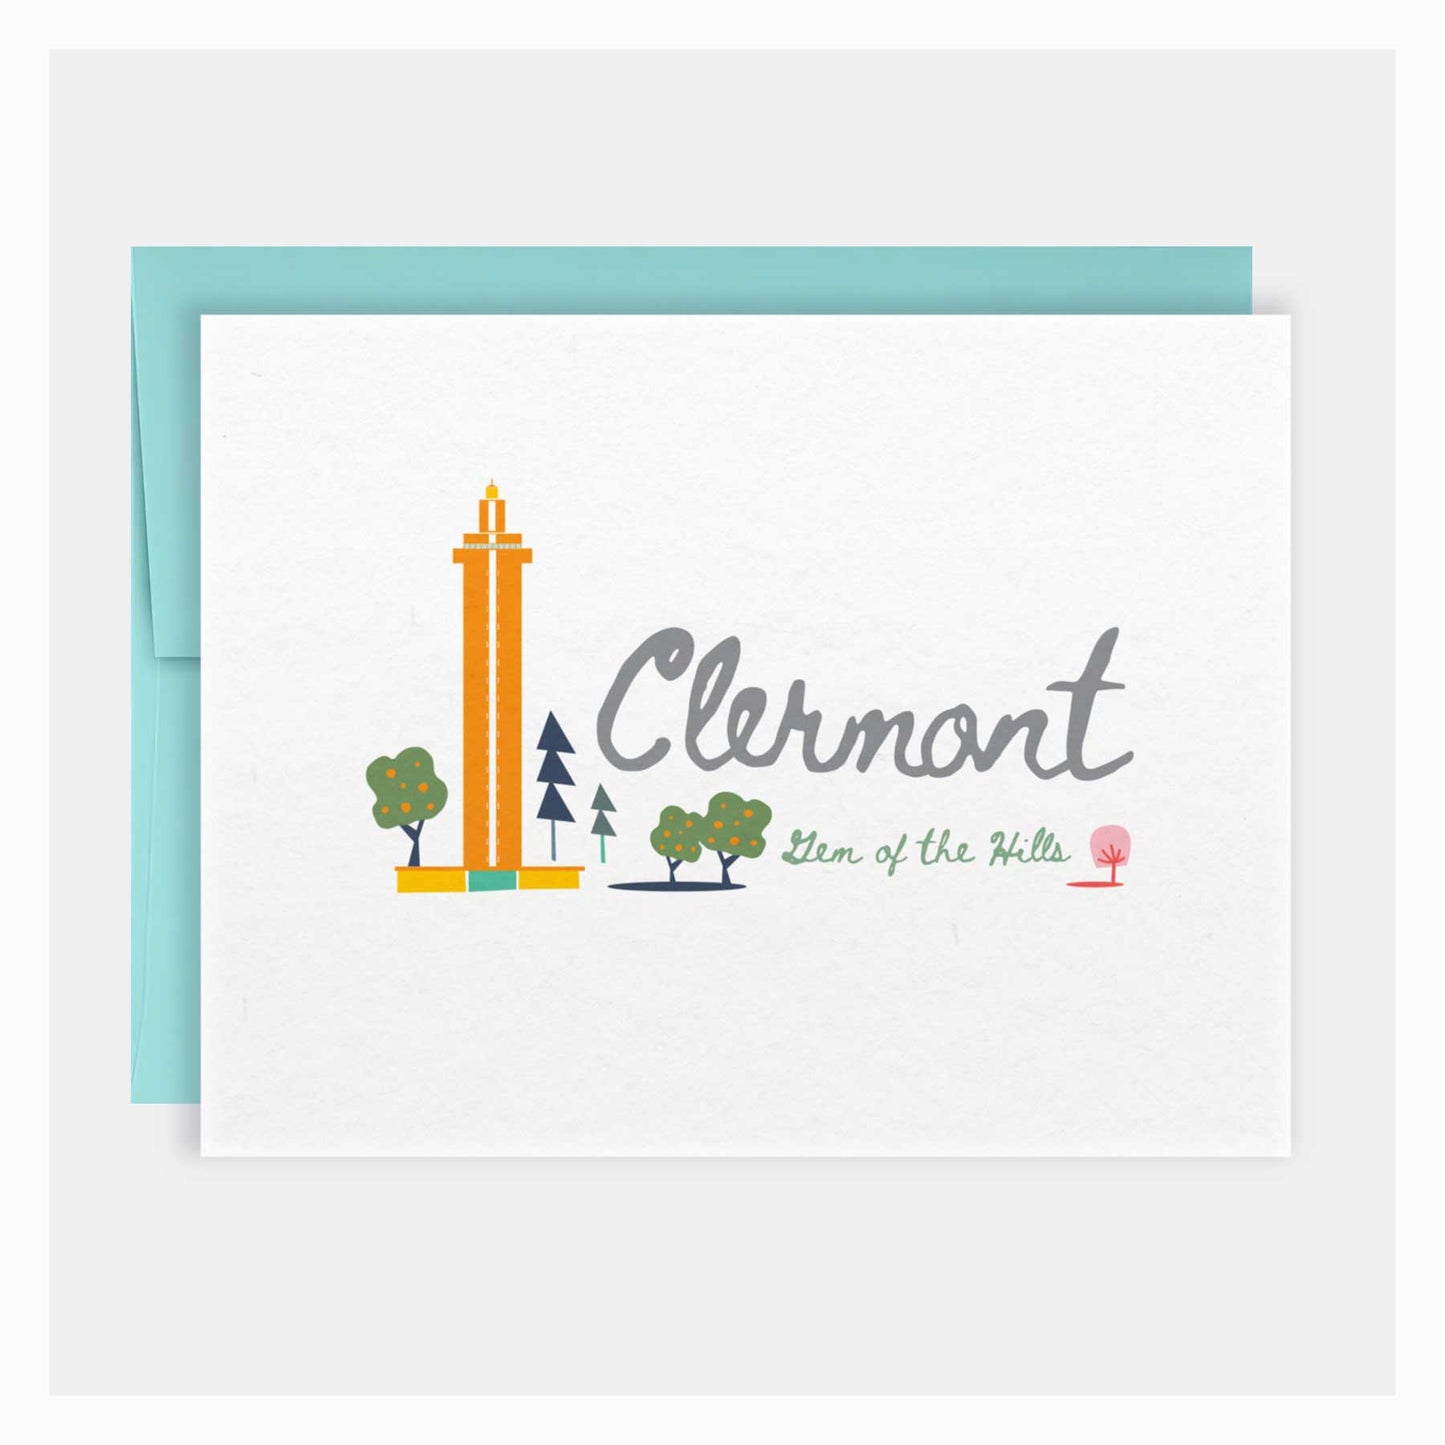 Citrus Tower Clermont Gem of the Hills Greeting Card - A. B. Newton and Company